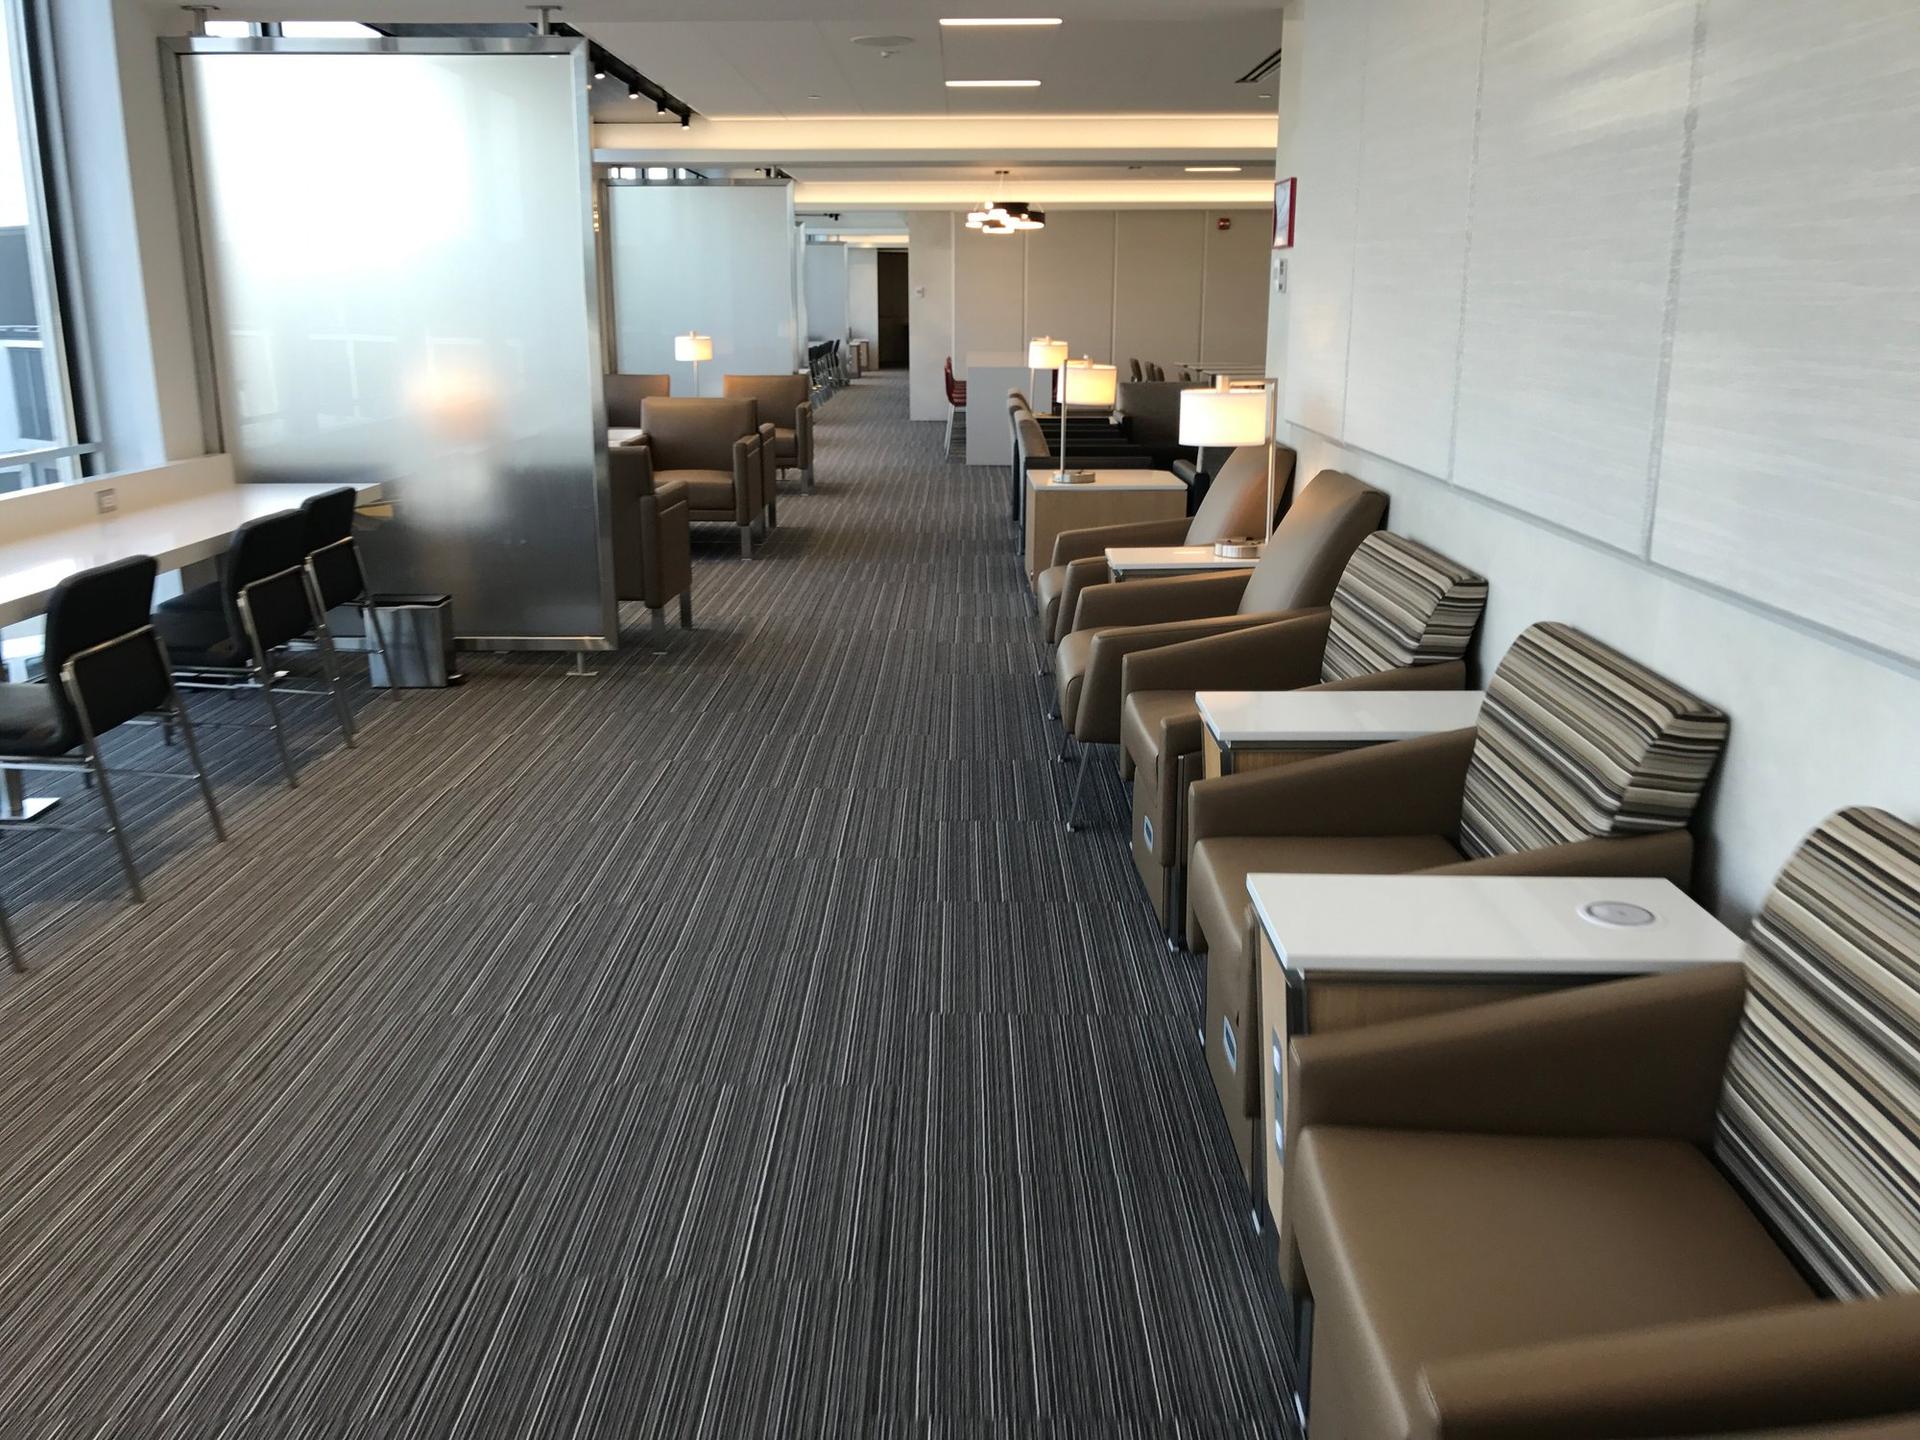 American Airlines Flagship Lounge image 8 of 13